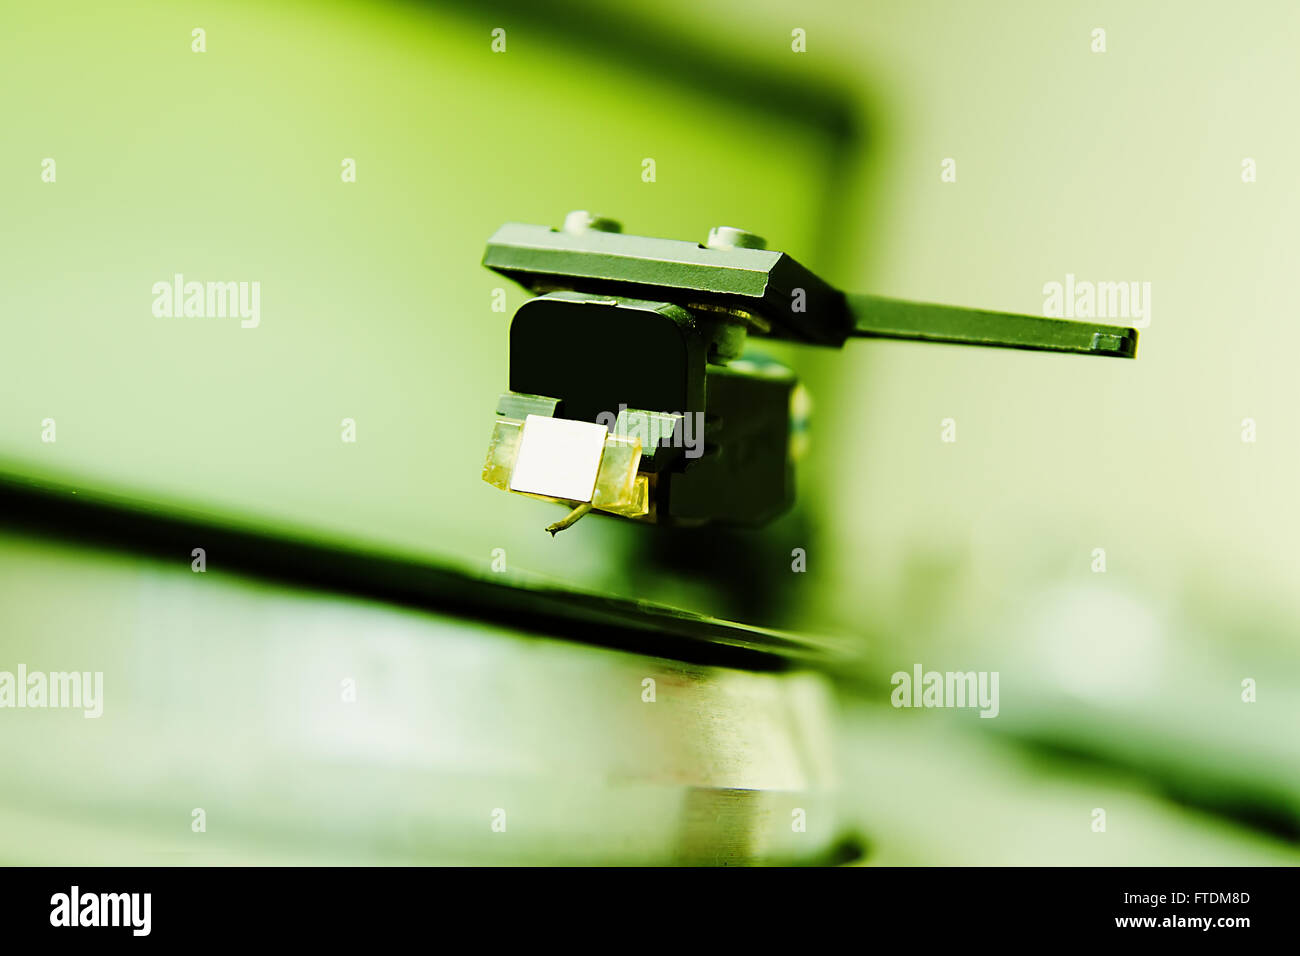 Turntable player with musical vinyl record. Useful for DJ, nightclub and retro theme. Saturated green color Stock Photo